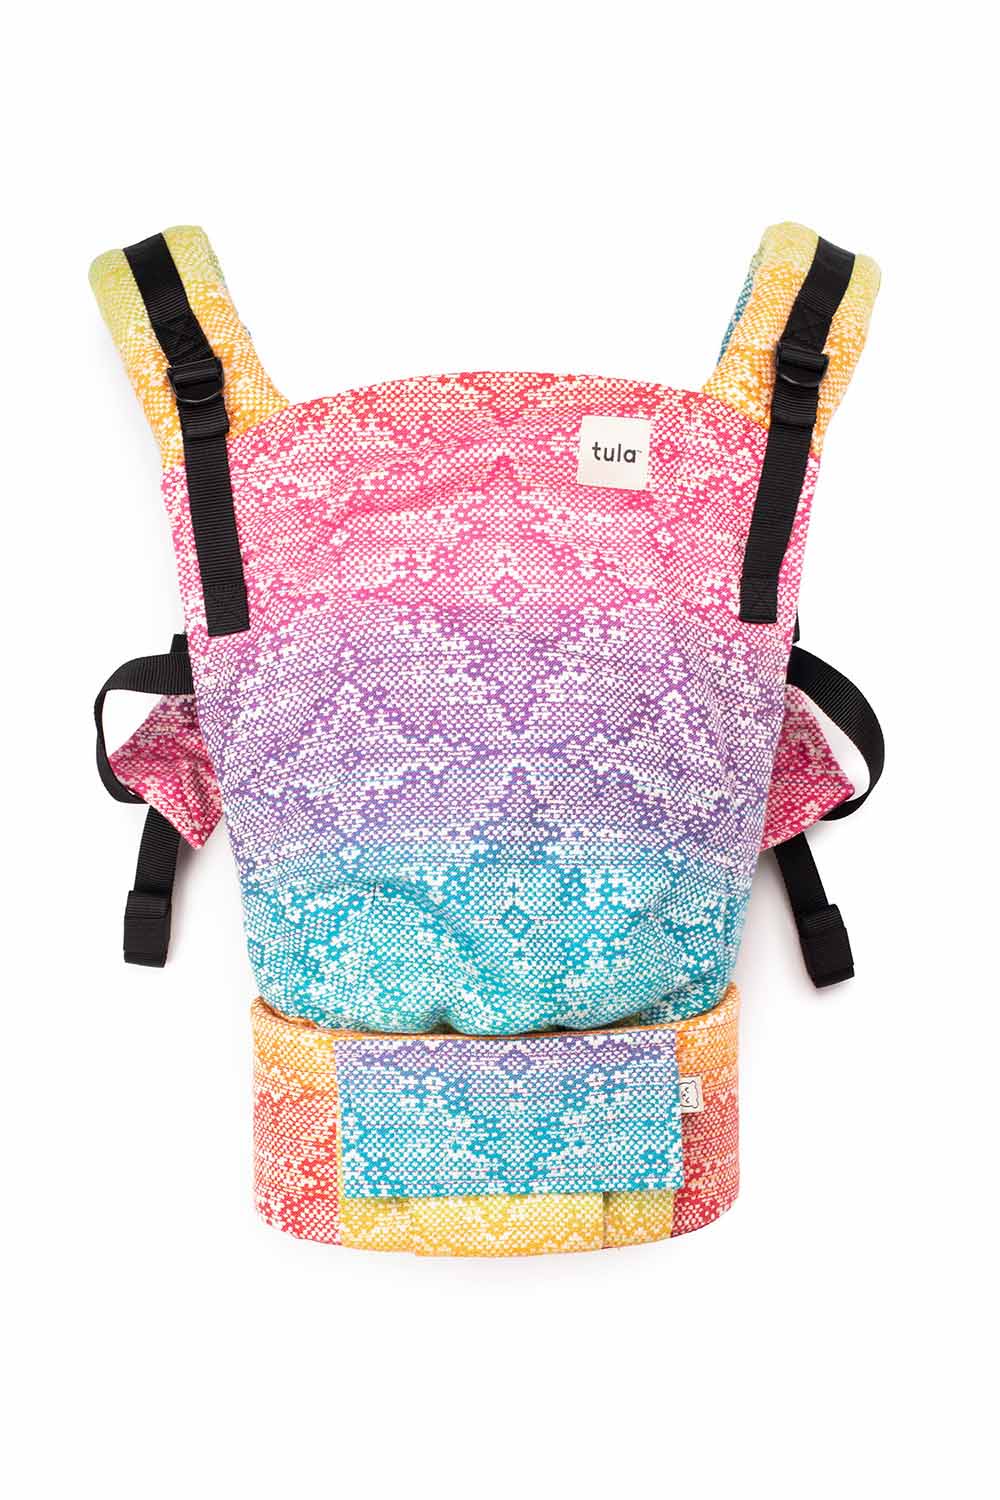 Jamilla - Signature Woven Free-to-Grow Baby Carrier